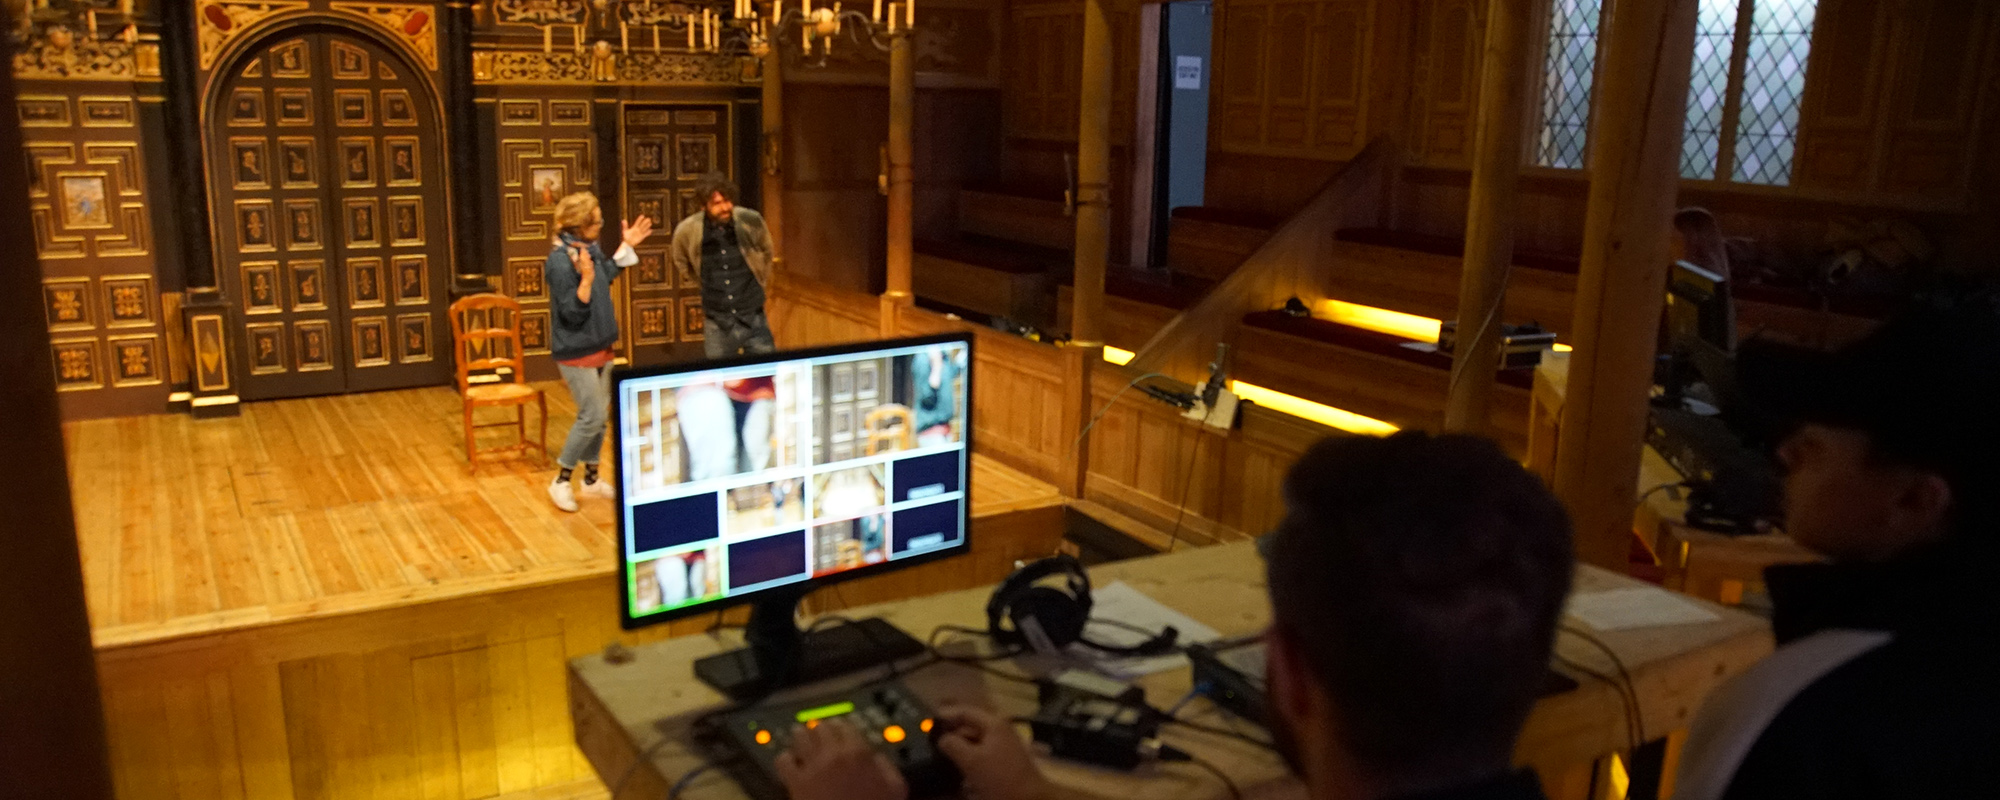 An image of the Sam Wanamaker PLayhouse with two actors rehearsing on the stage and a monitor showing different camera angles